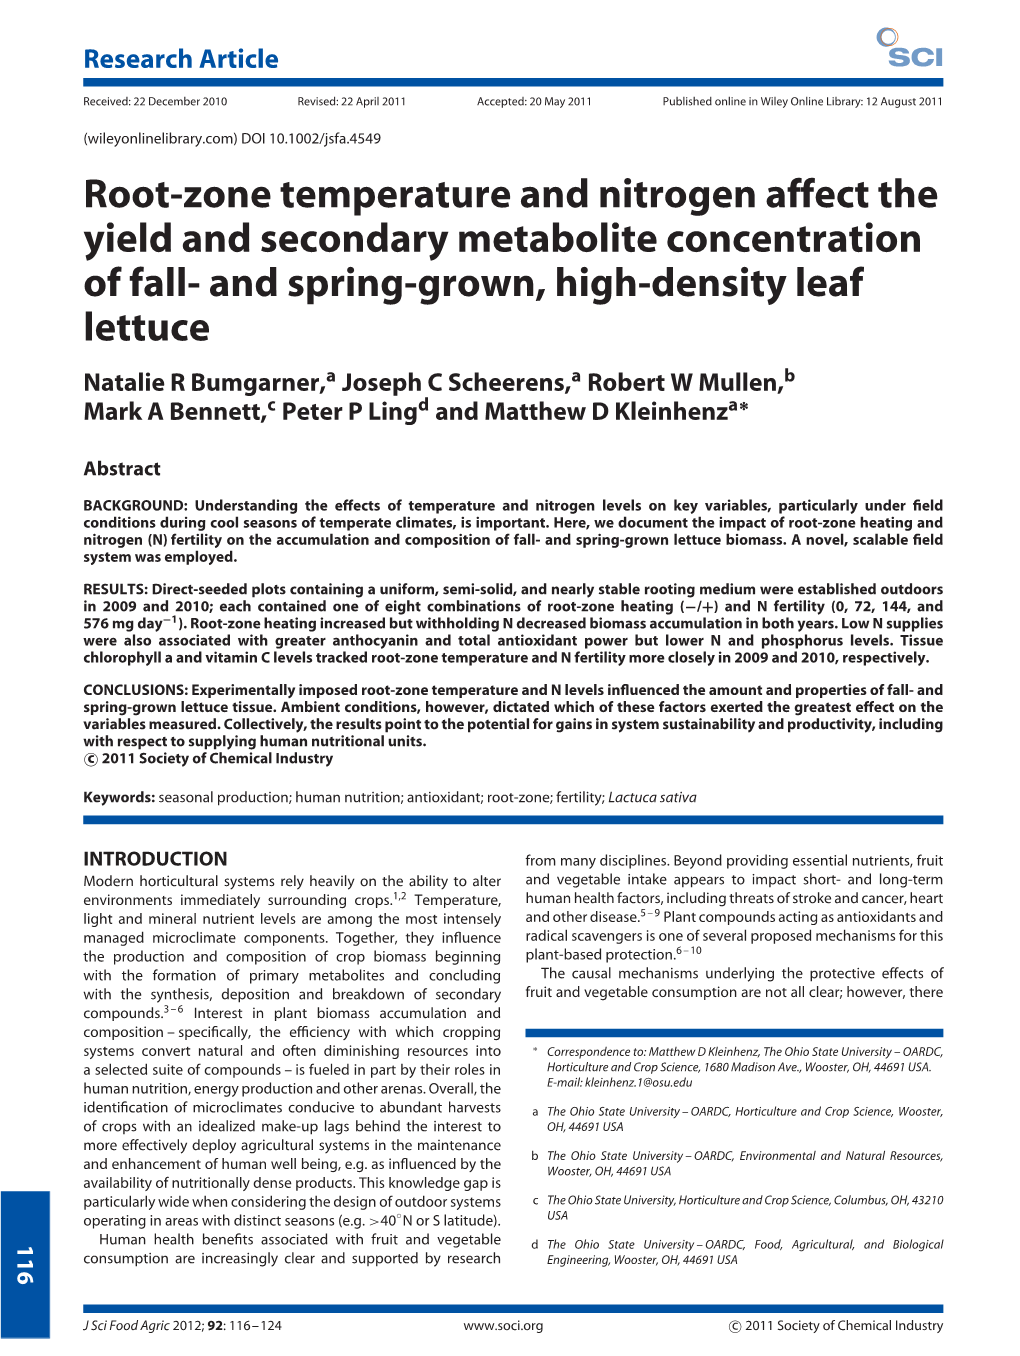 Rootzone Temperature and Nitrogen Affect the Yield and Secondary